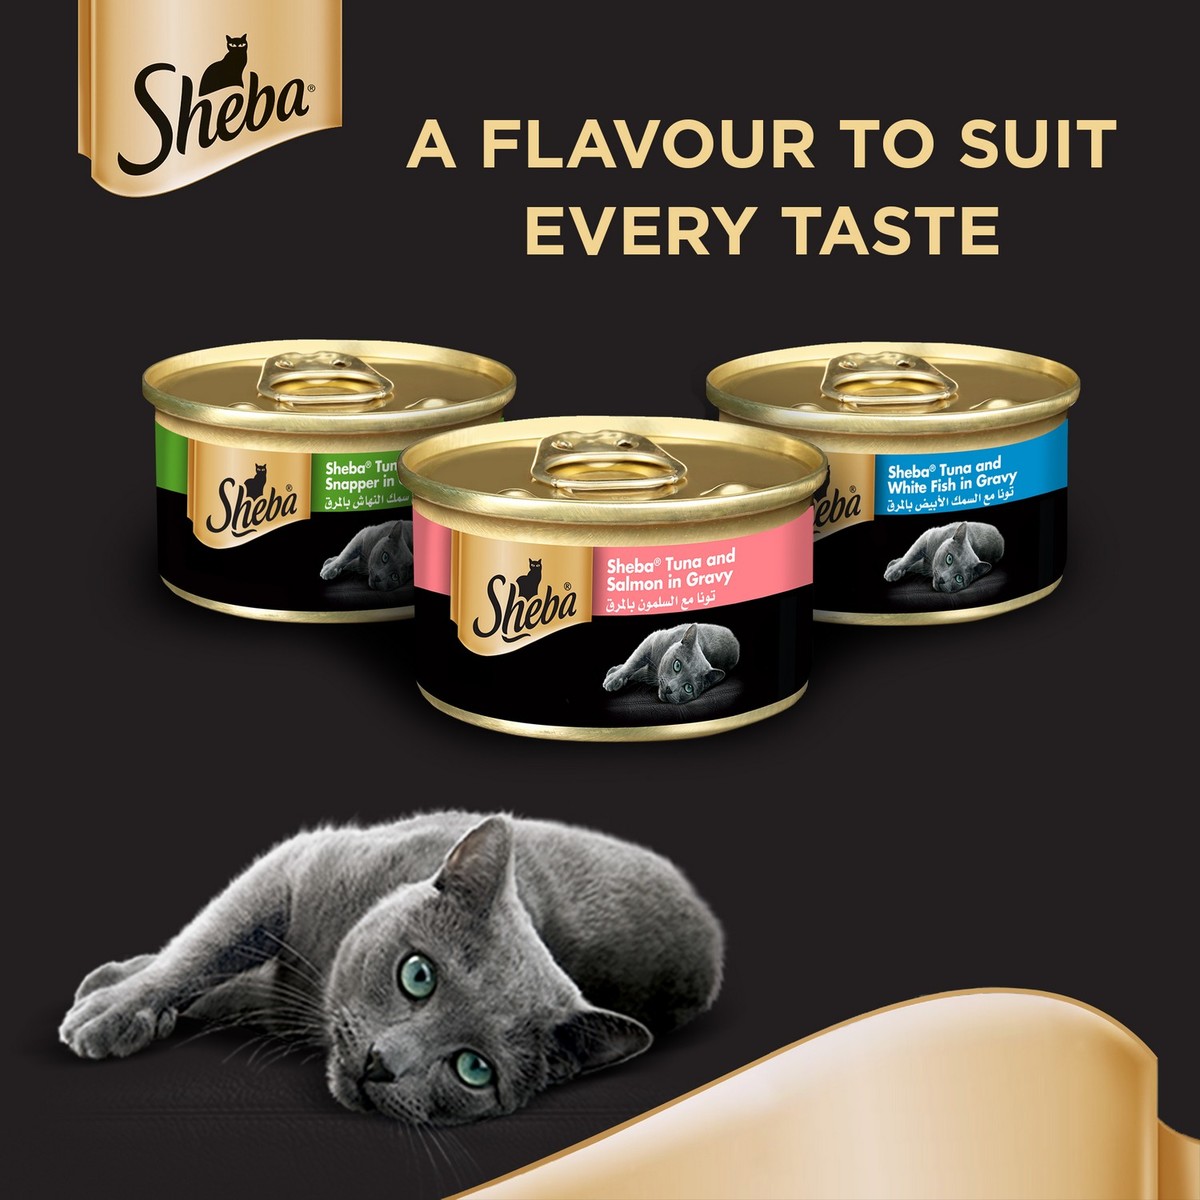 Sheba Flaked Tuna Topped with Salmon Cat Food 6 x 85 g